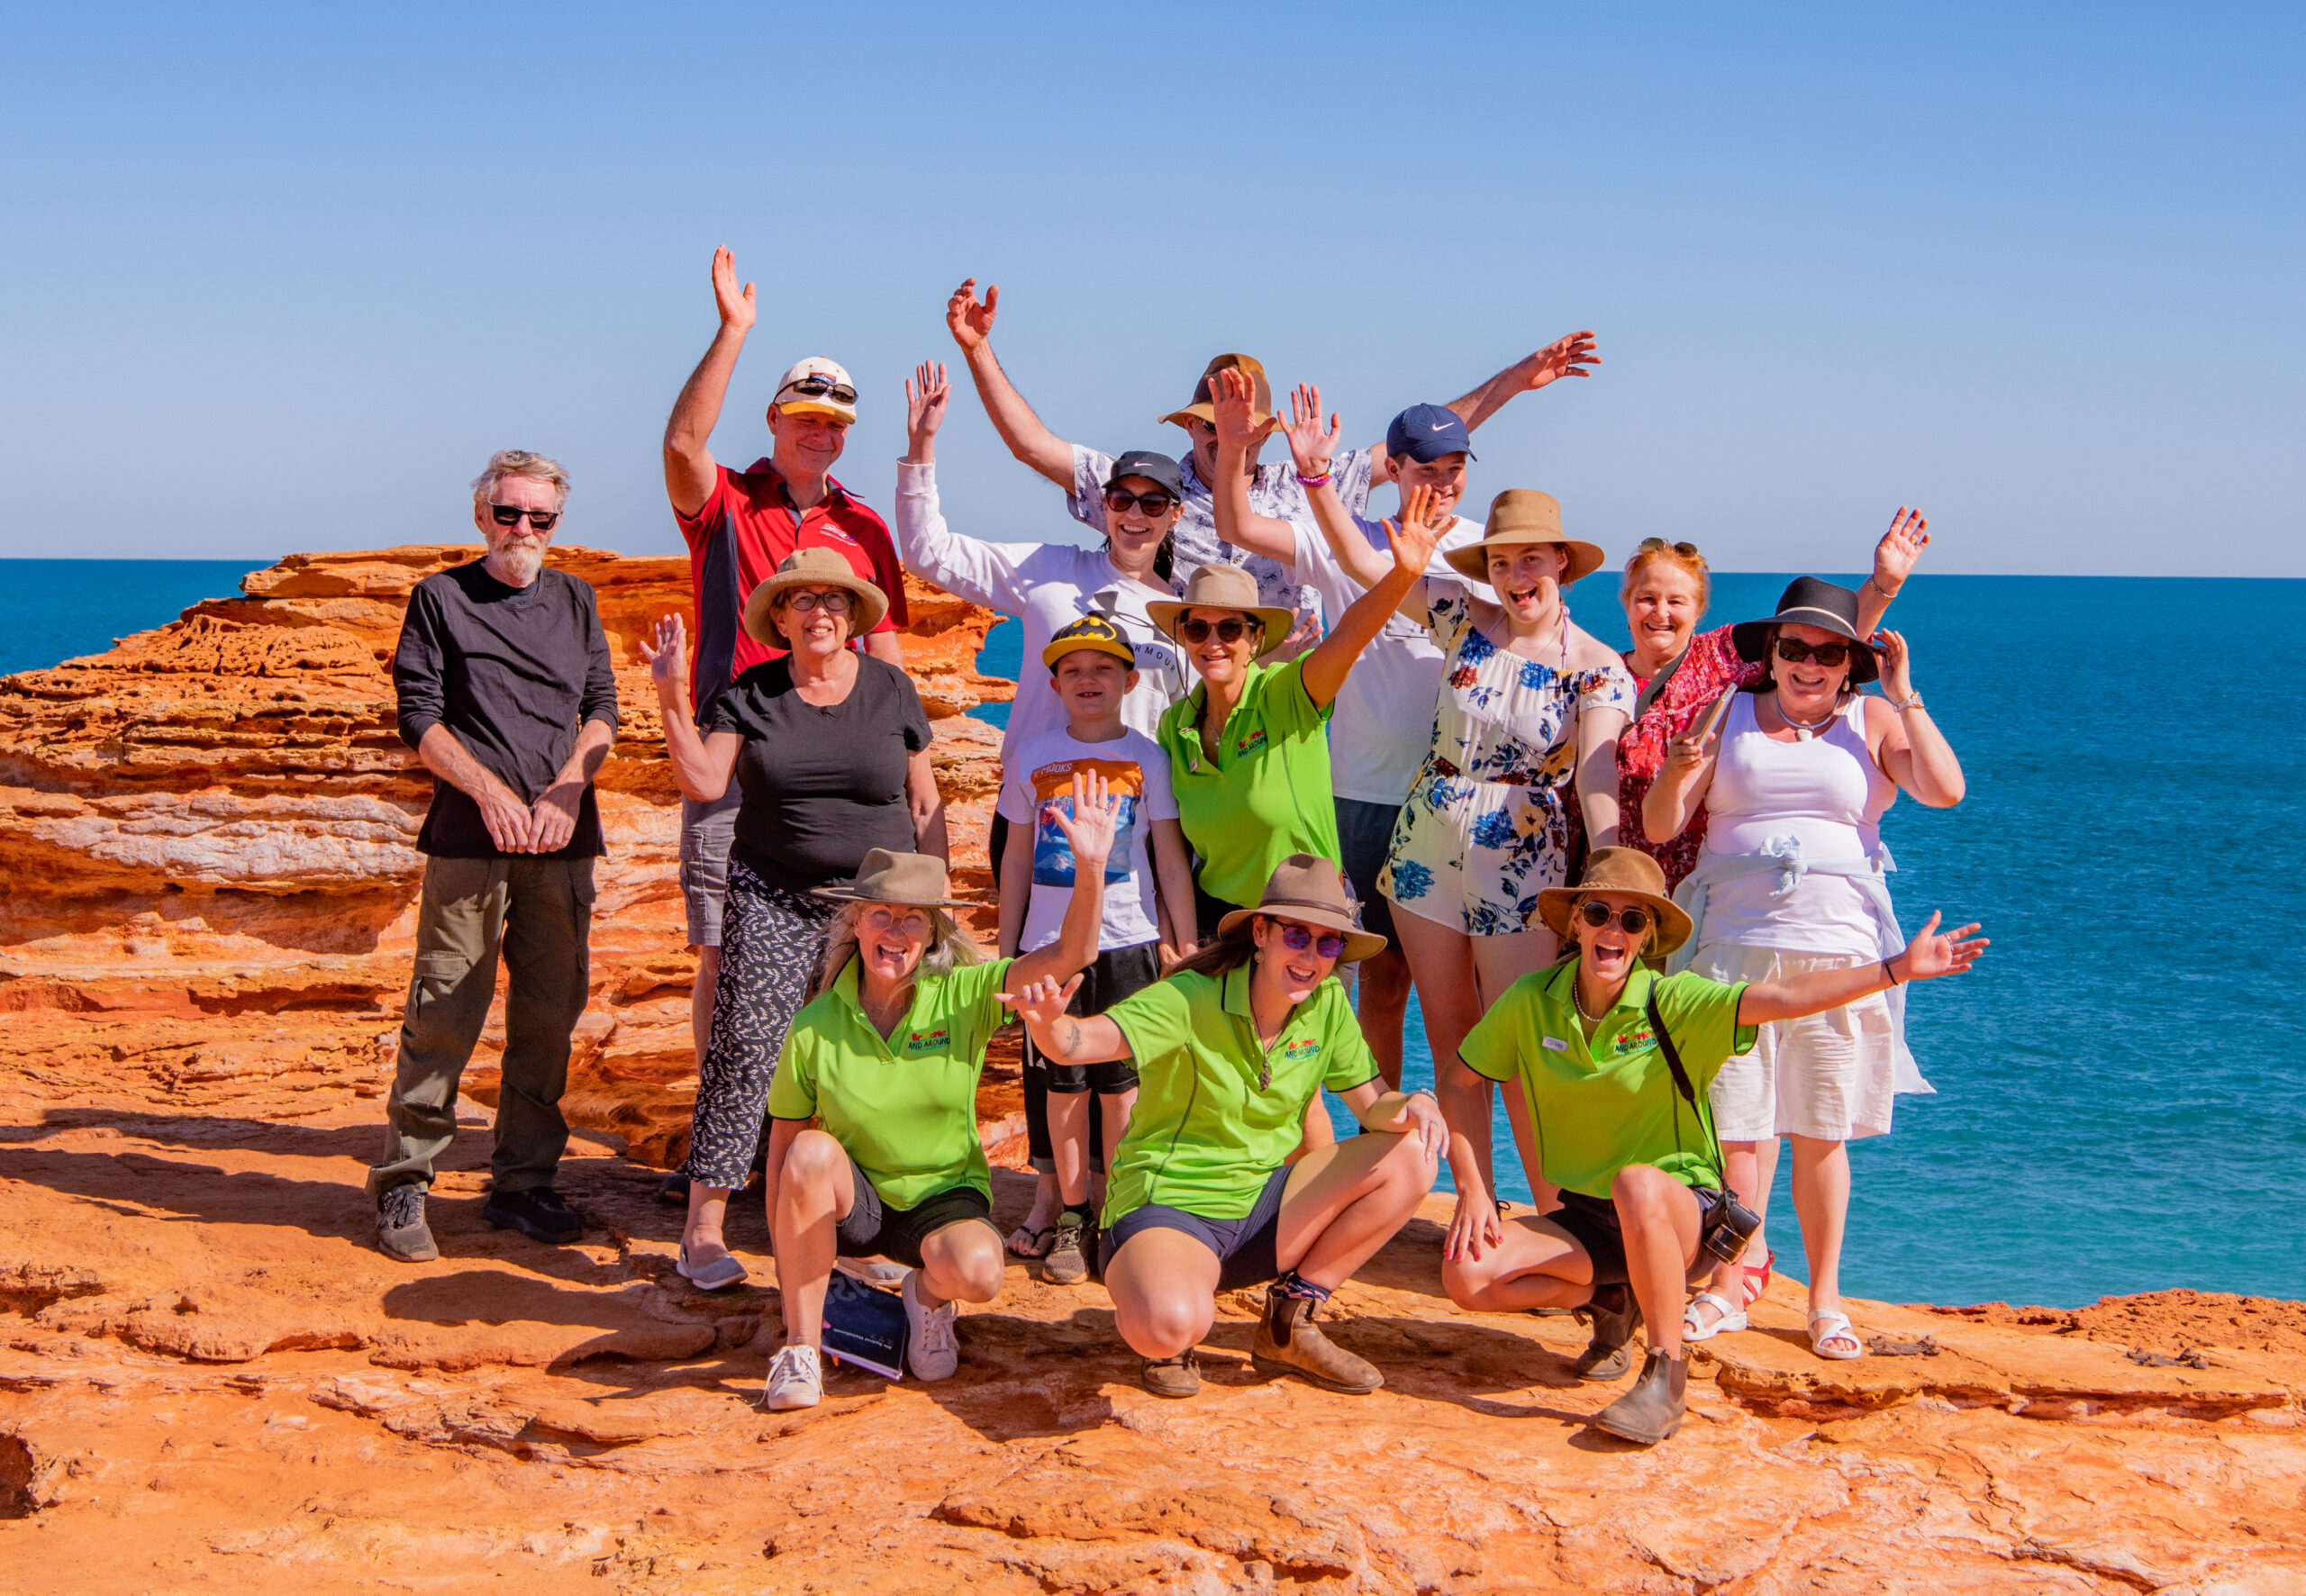 Broome Panoramic Sightseeing Tour – Discover Broome – Best of Broome sights, culture and history (Morning Tour)